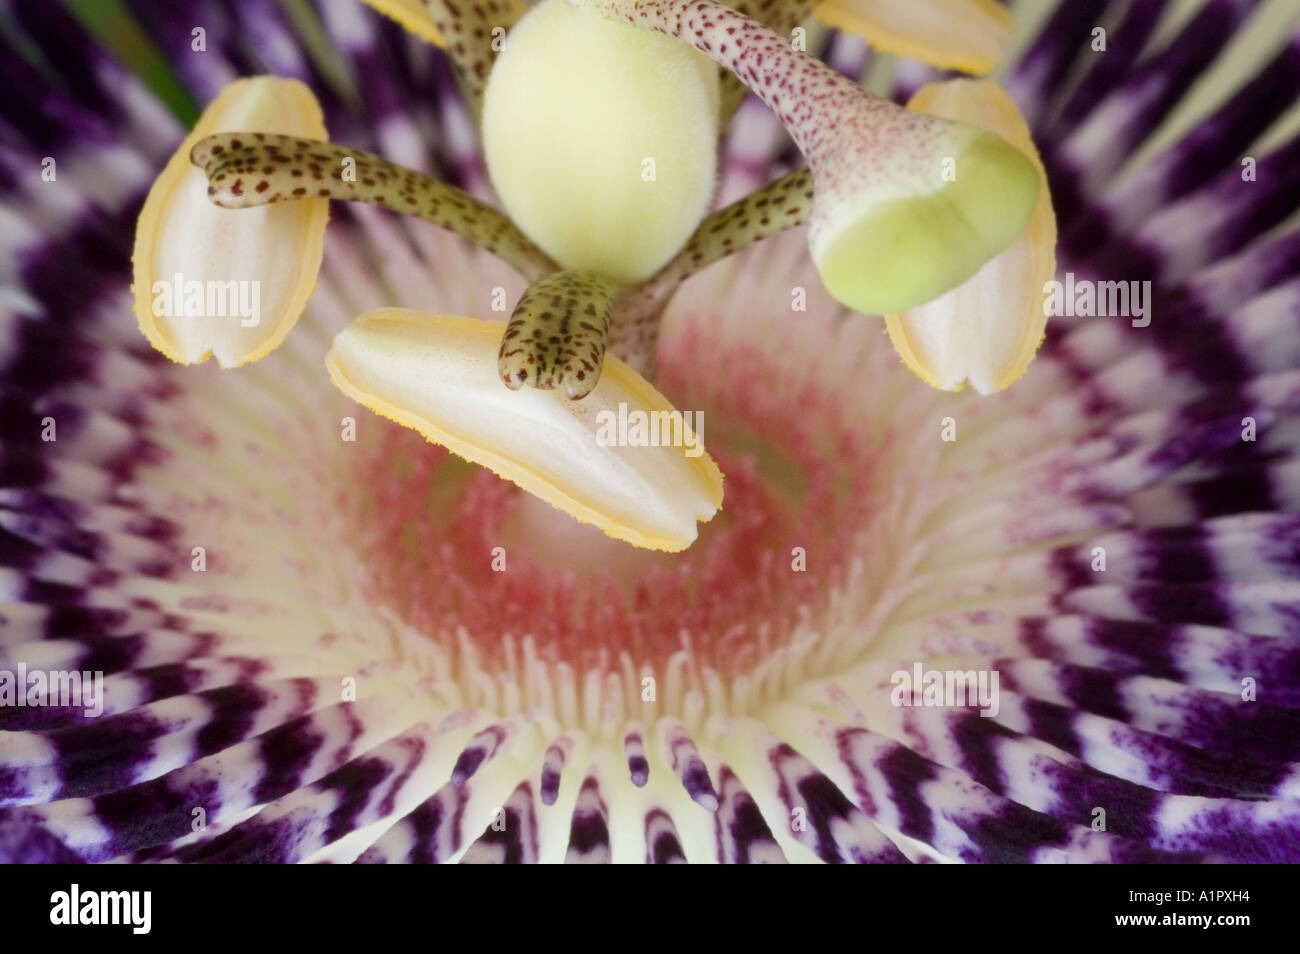 Passion Flower or Passiflora, Malaysia, South East Asia Stock Photo